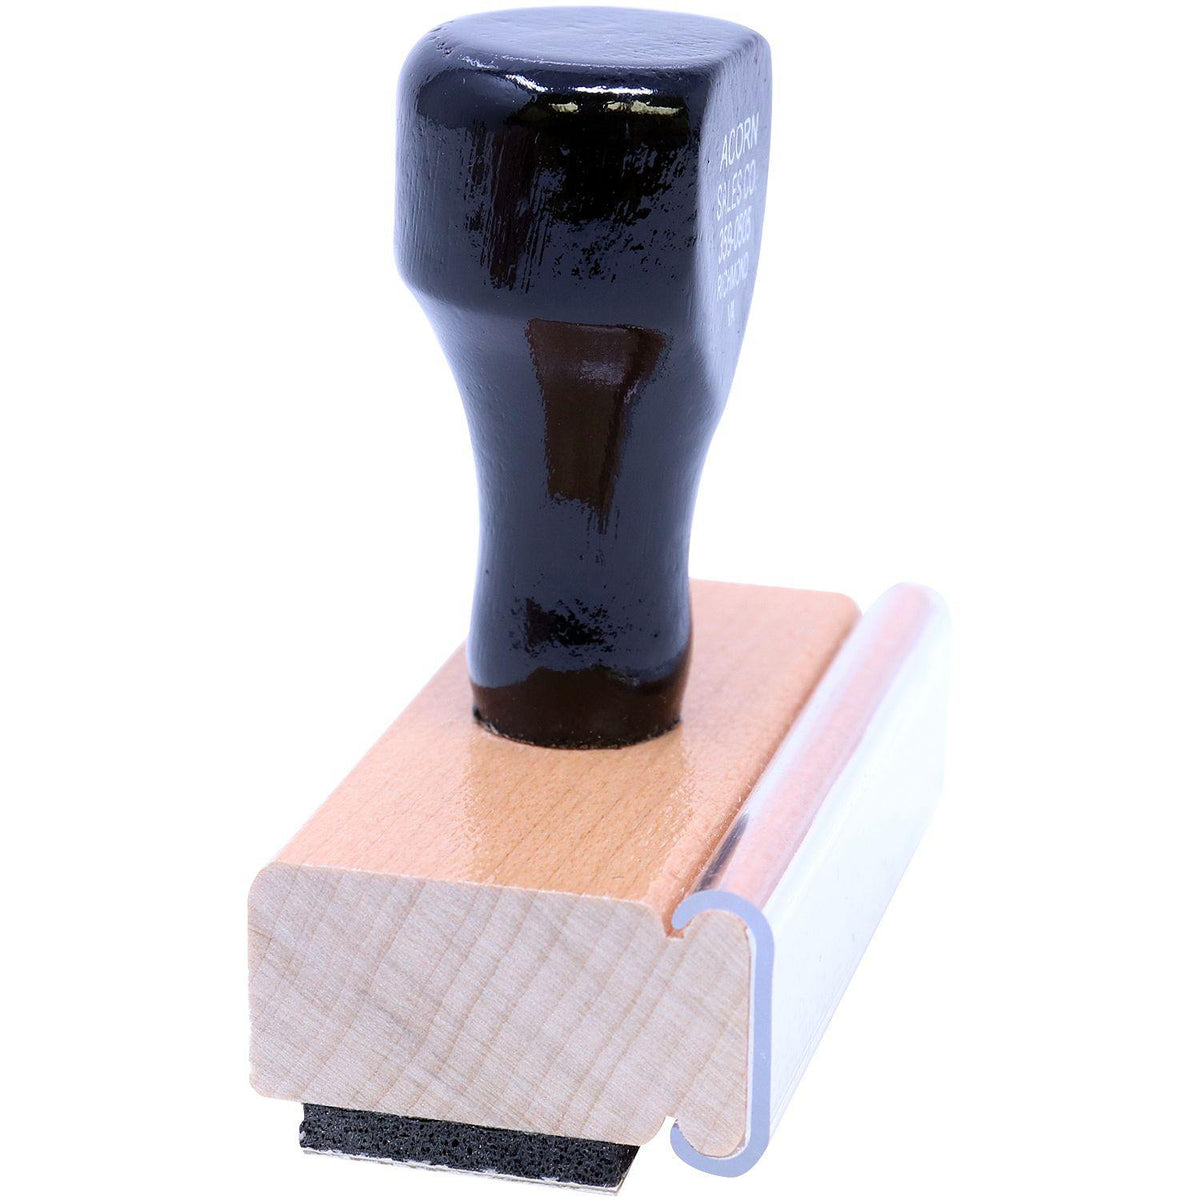 Side View of Special Funds Rubber Stamp at an Angle